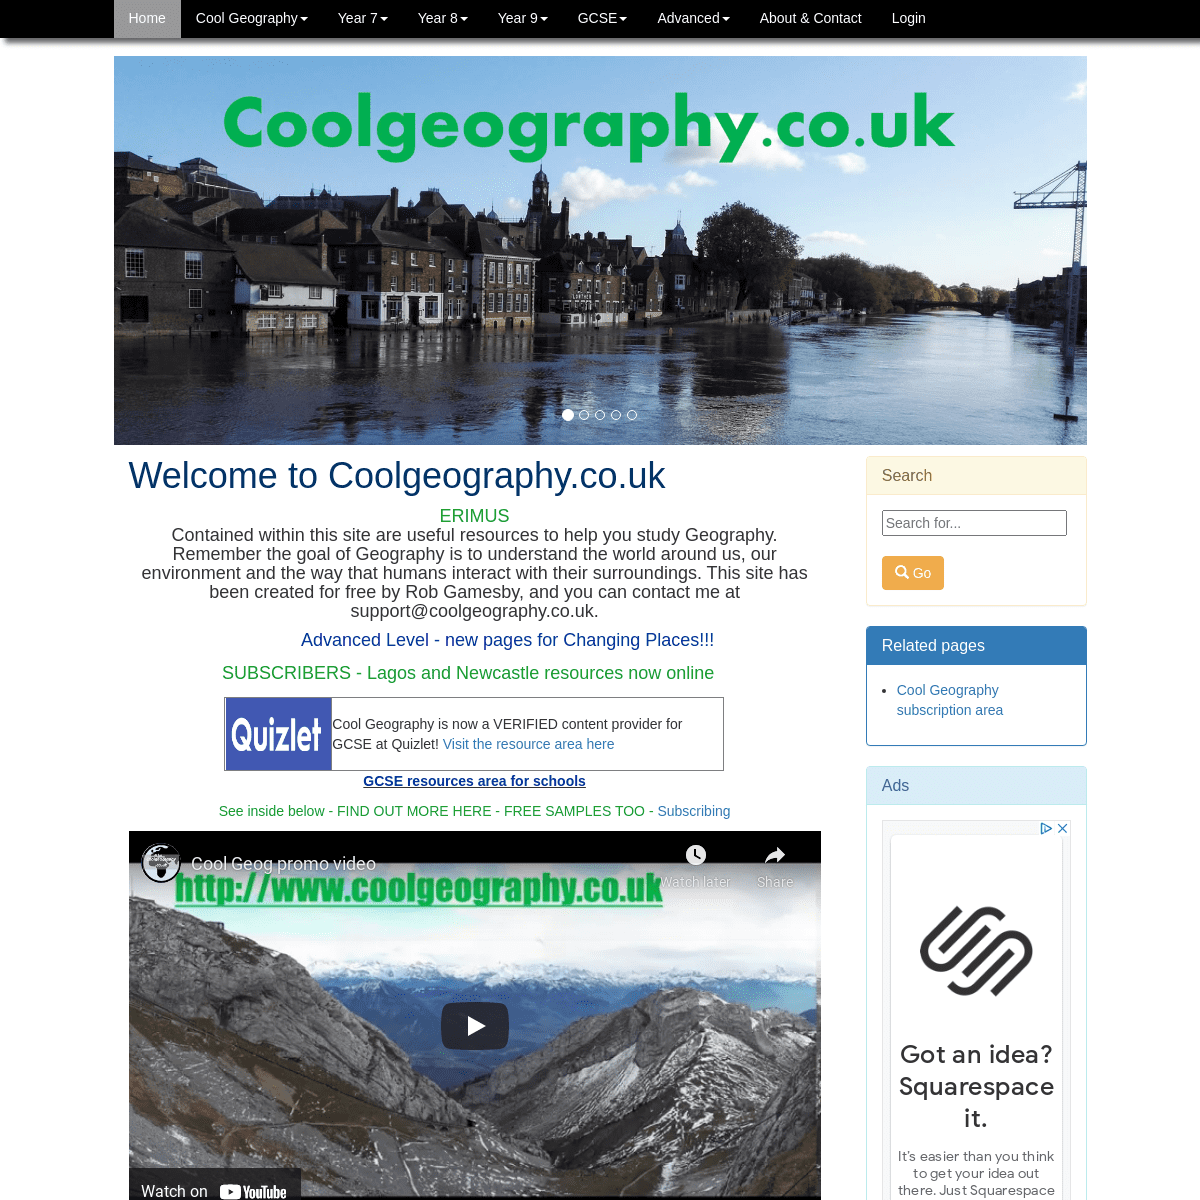 A complete backup of https://coolgeography.co.uk